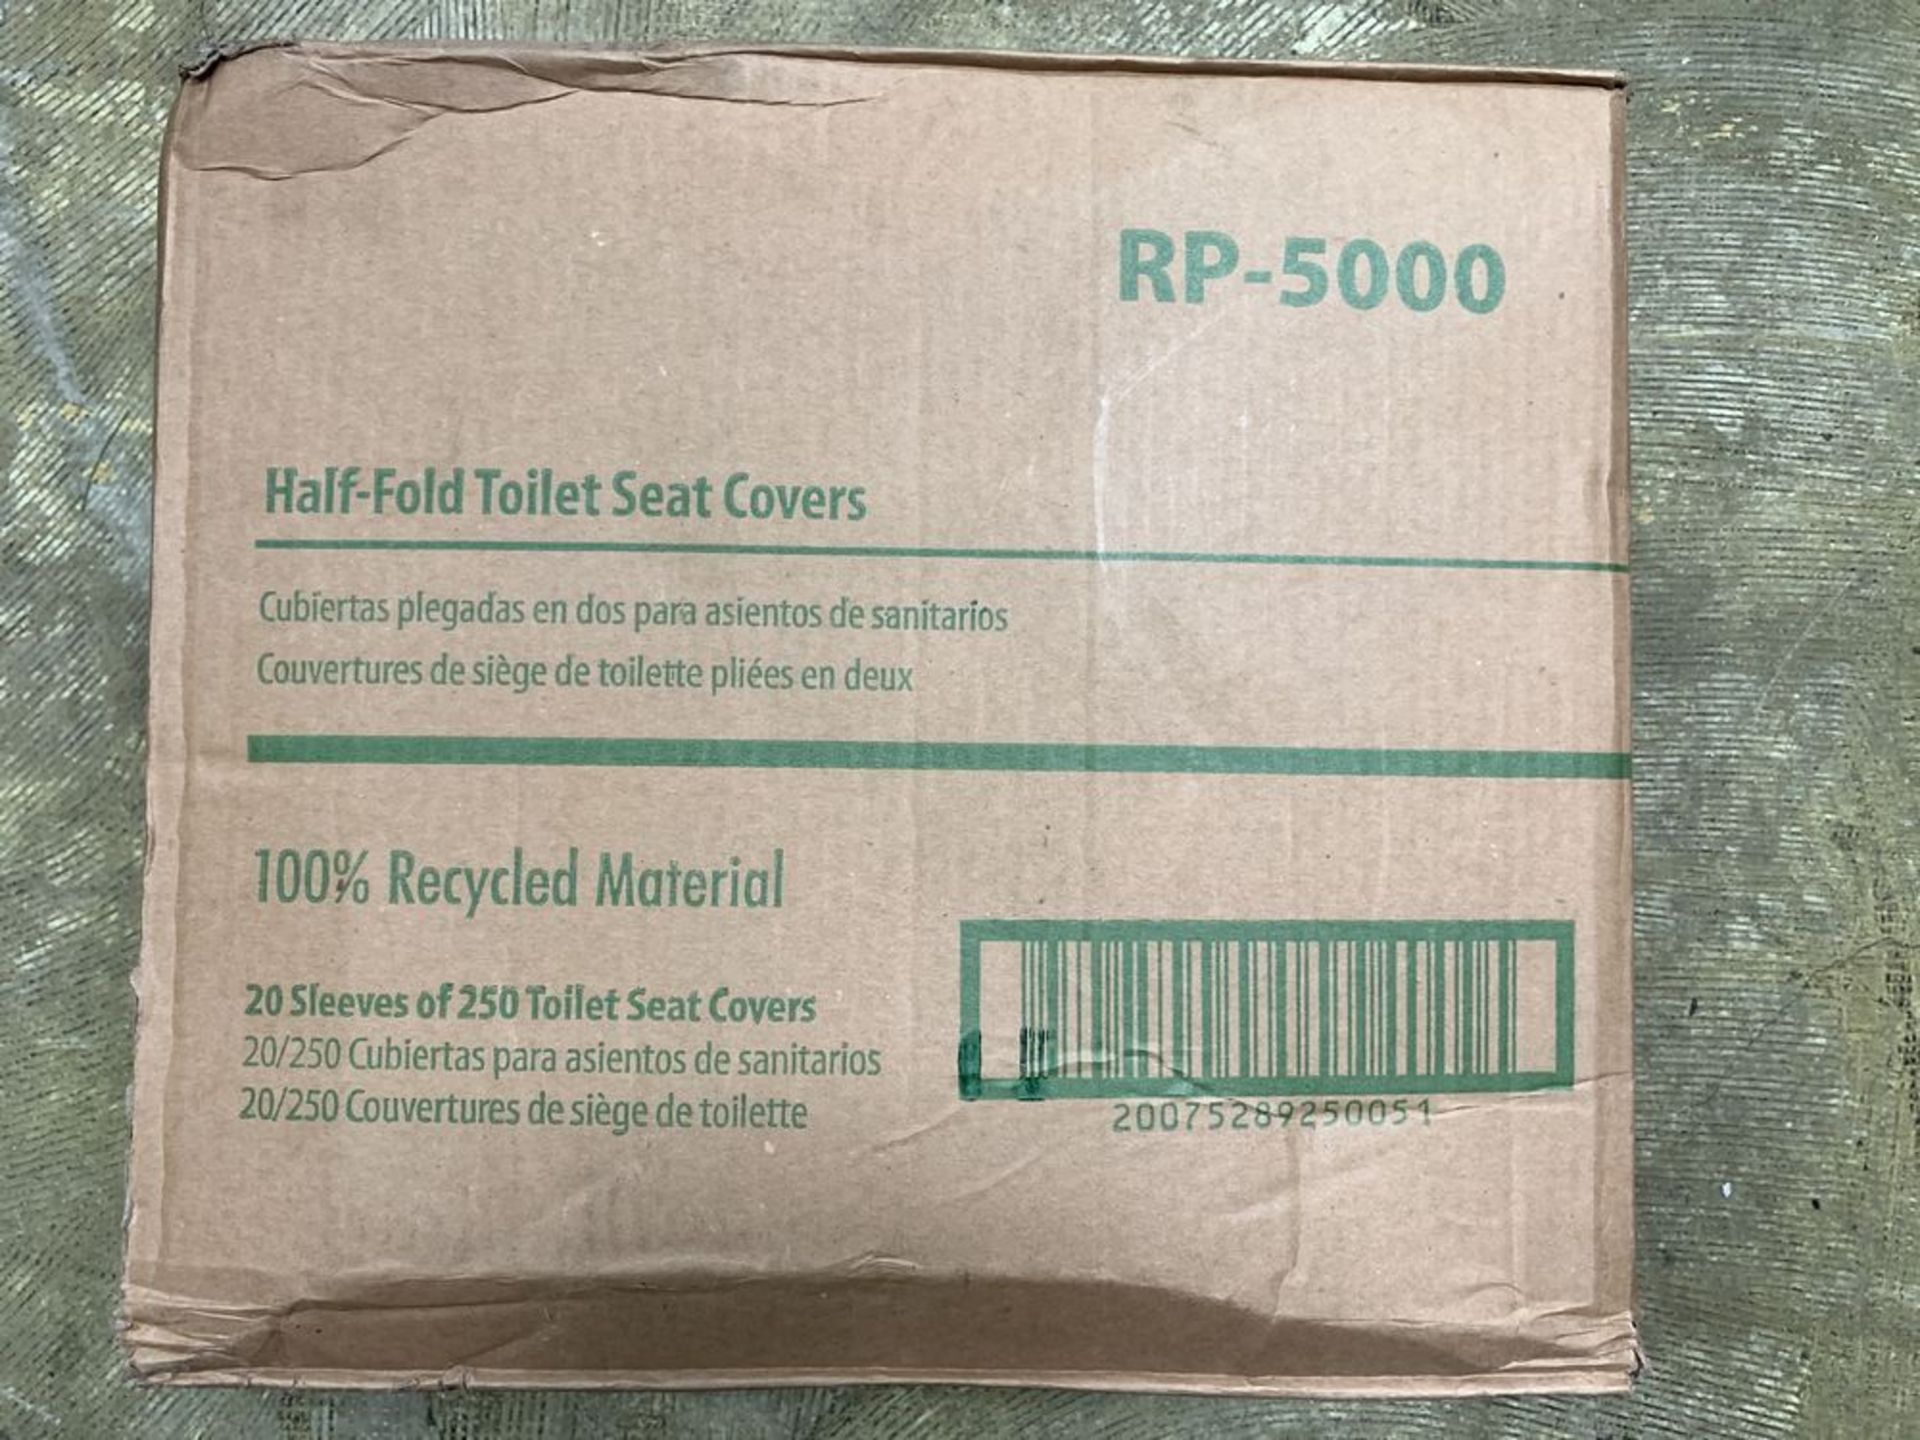 32 PACKS - HOSPECO HEALTHGARD TOILET SEAT COVERS - WHITE 250 COVERS/ PACK - HALF FOLD - MODEL - Image 4 of 5